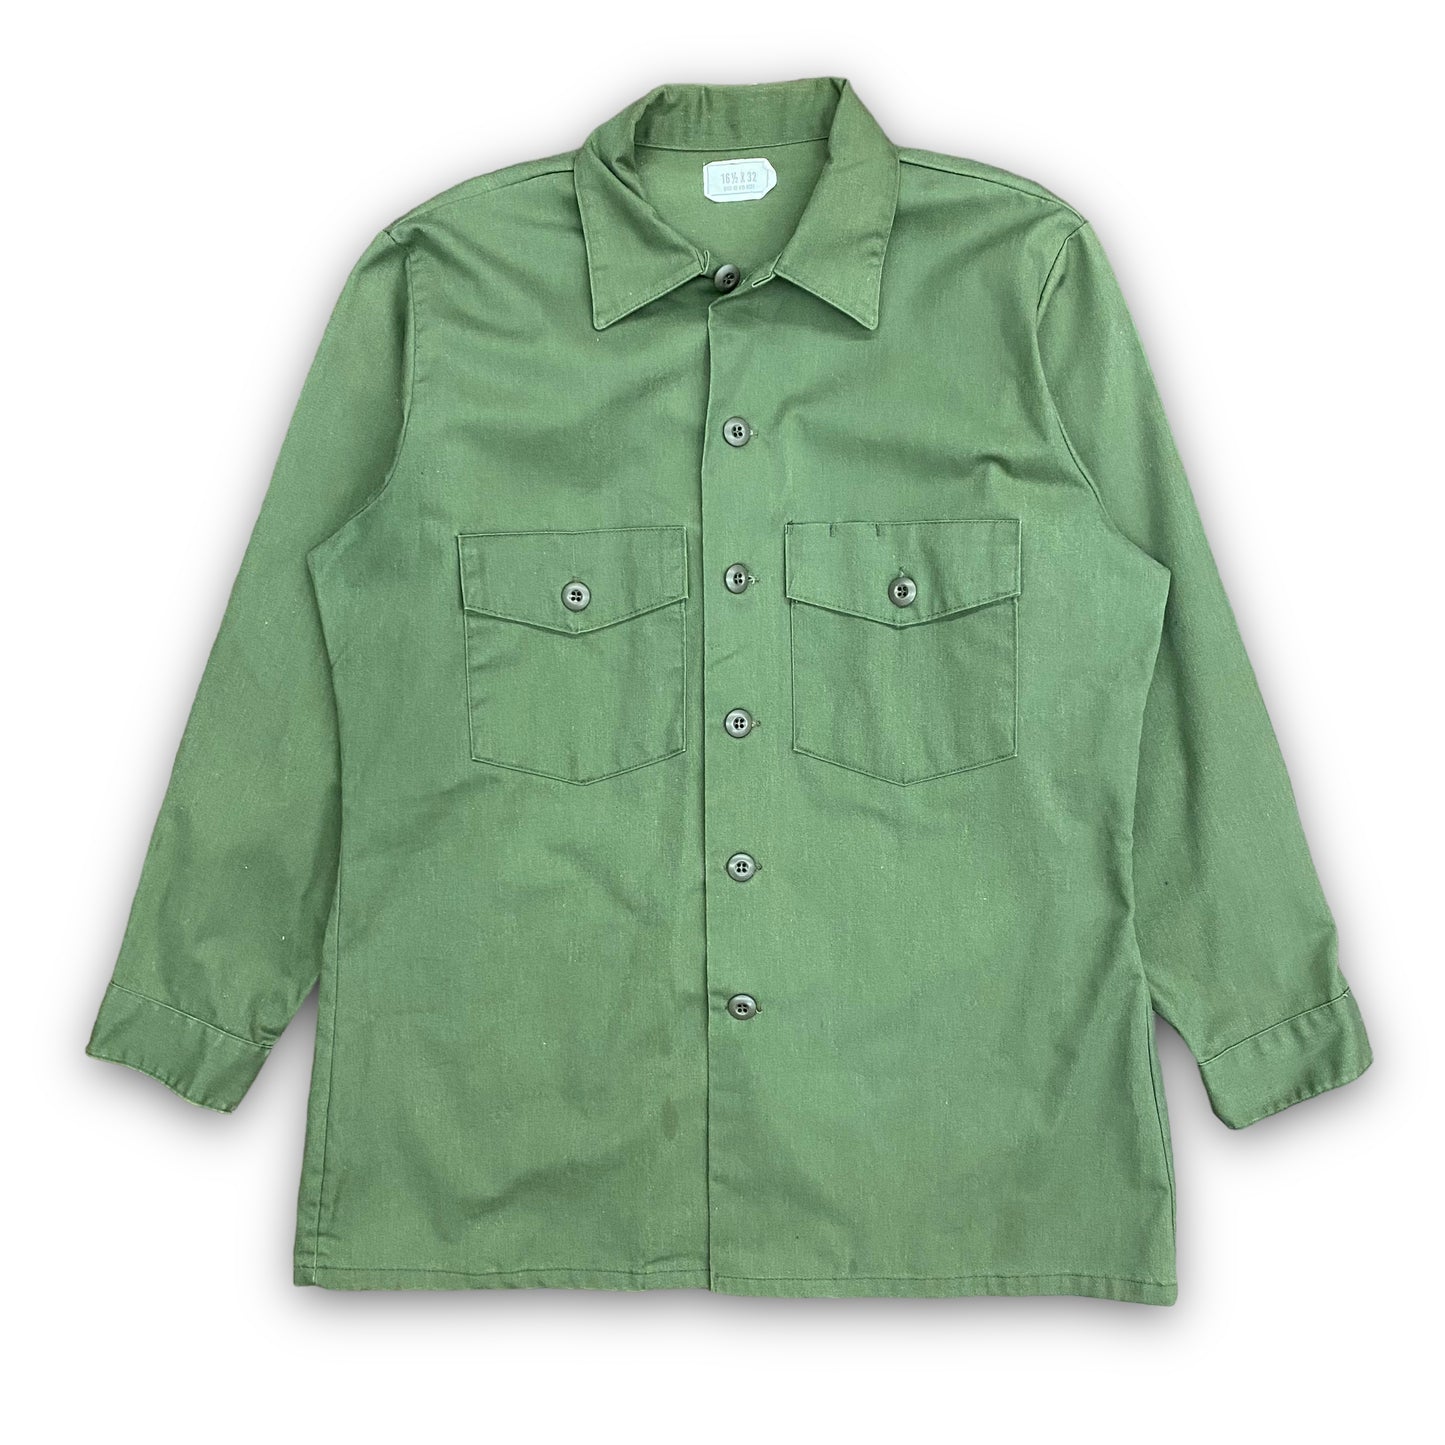 Vintage Olive Green Military Issue Button Up - Size Large